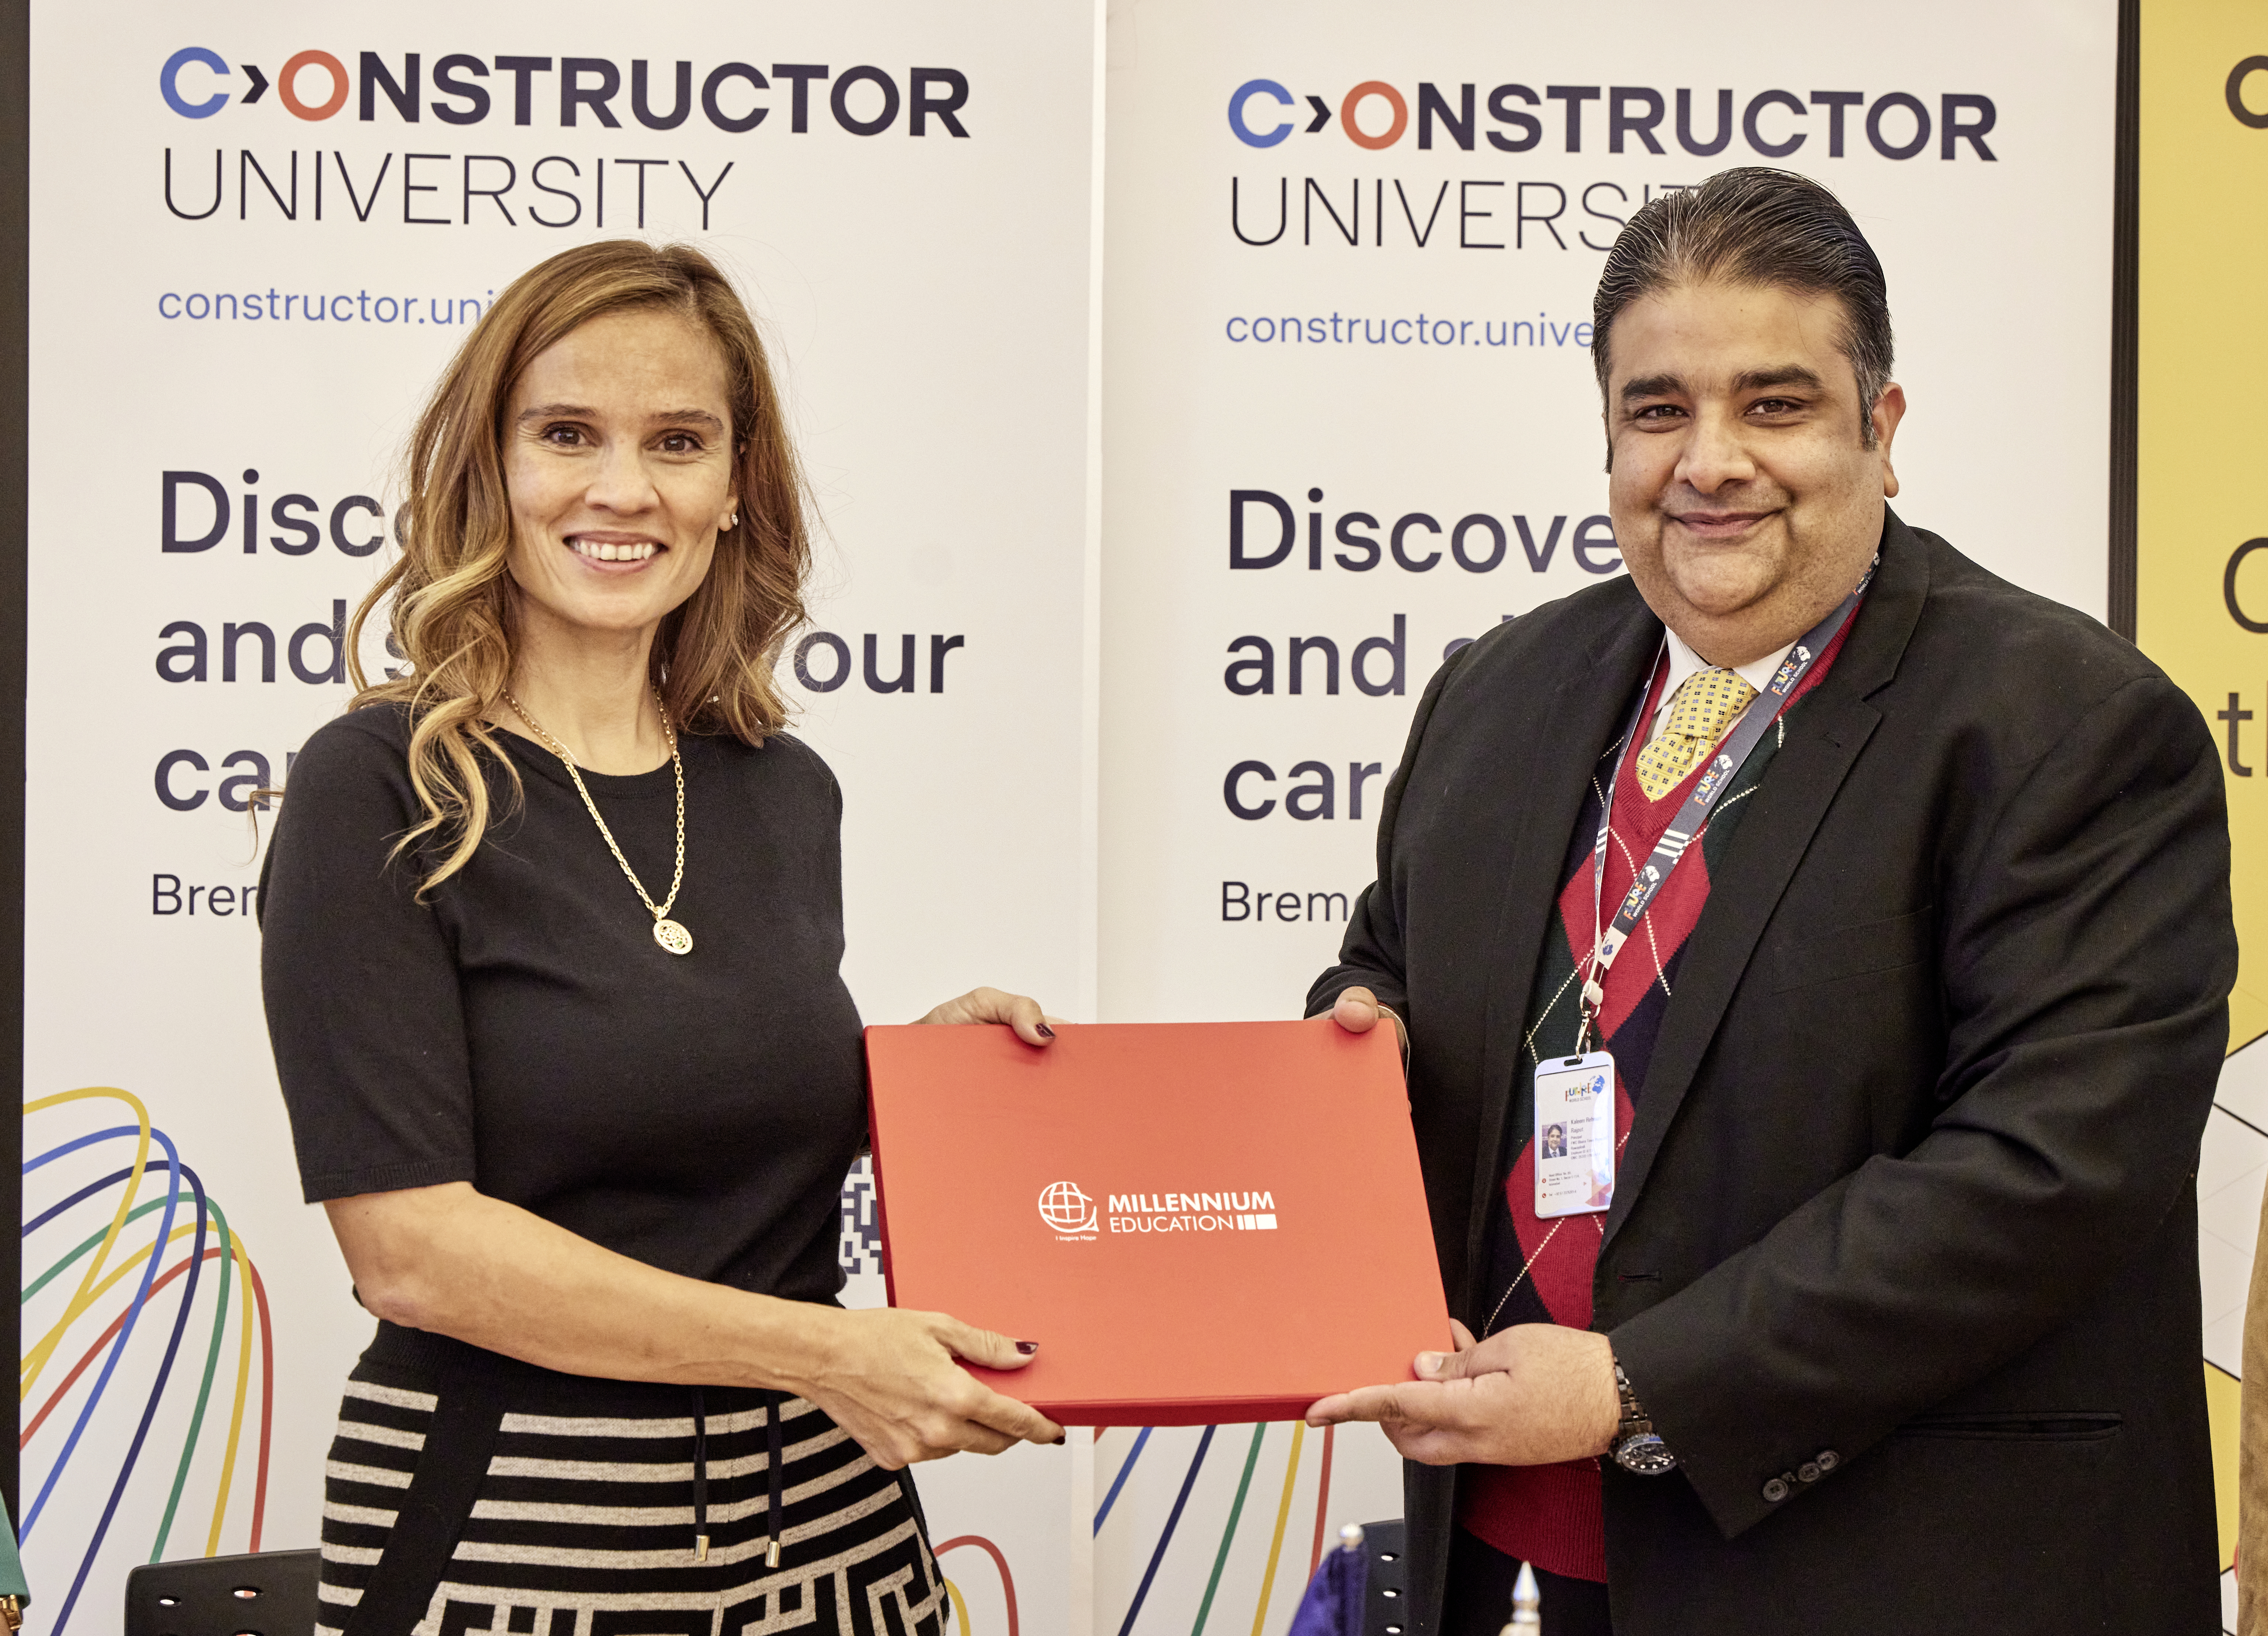 Constructor University signed a Memorandum of Understanding with the renowned Roots Millennium Education Group Pakistan to further expand and deepen the University’s international network